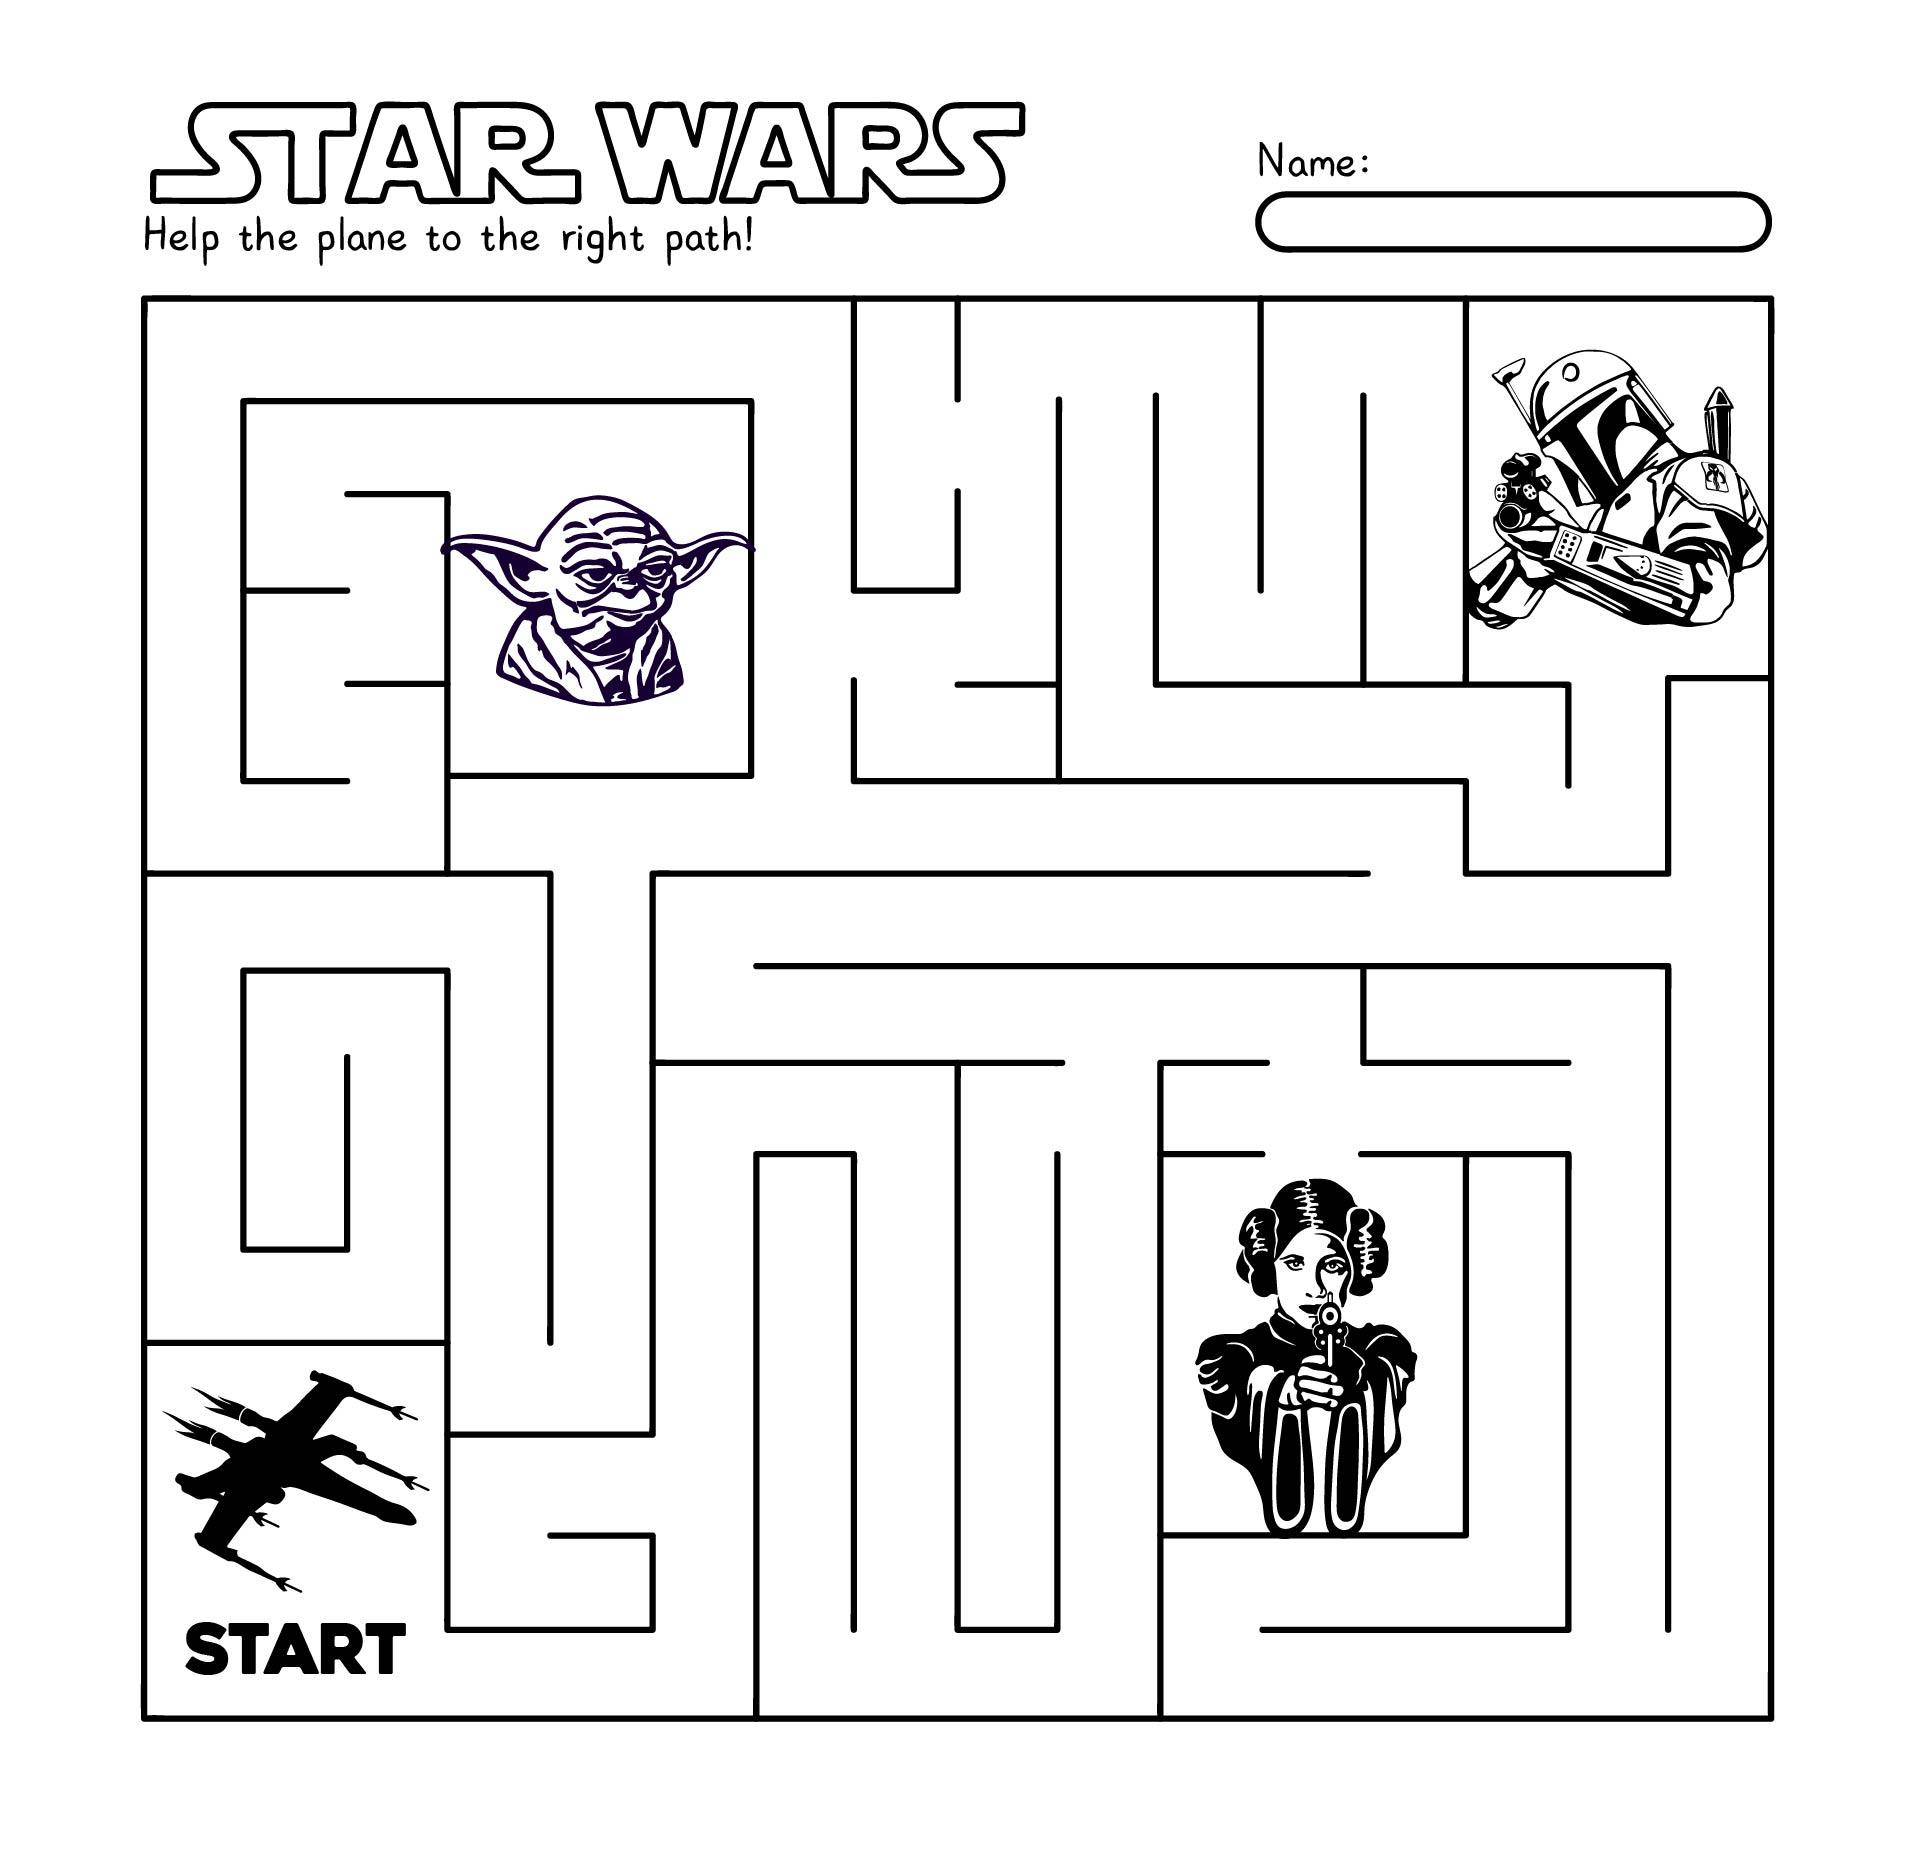 6-best-images-of-star-wars-mazes-printable-star-wars-mazes-printable